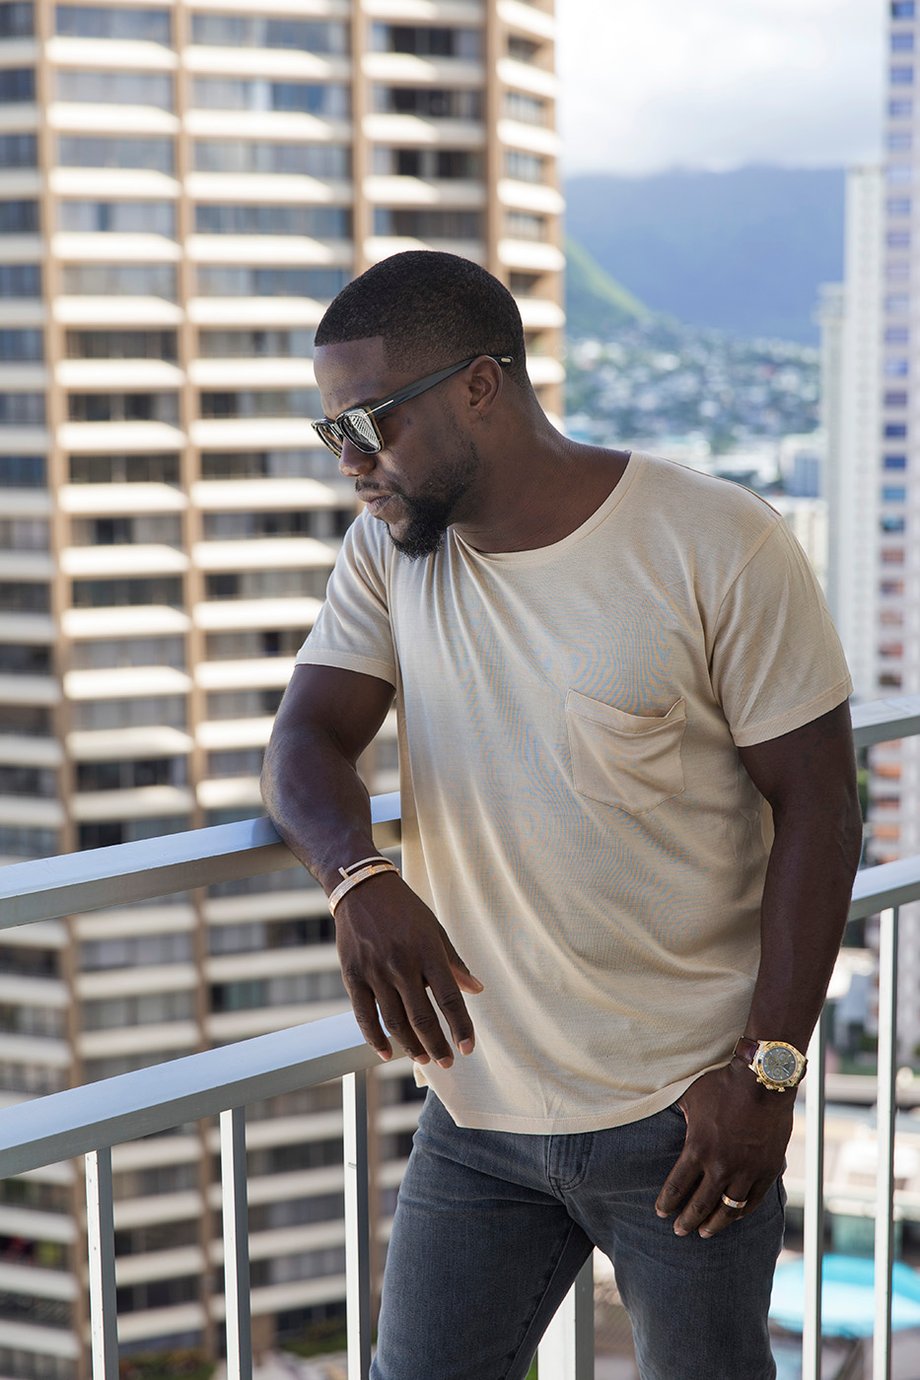 photo of kevin hart at the ilikai hotel in hawaii shot by marco garcia for the nyt